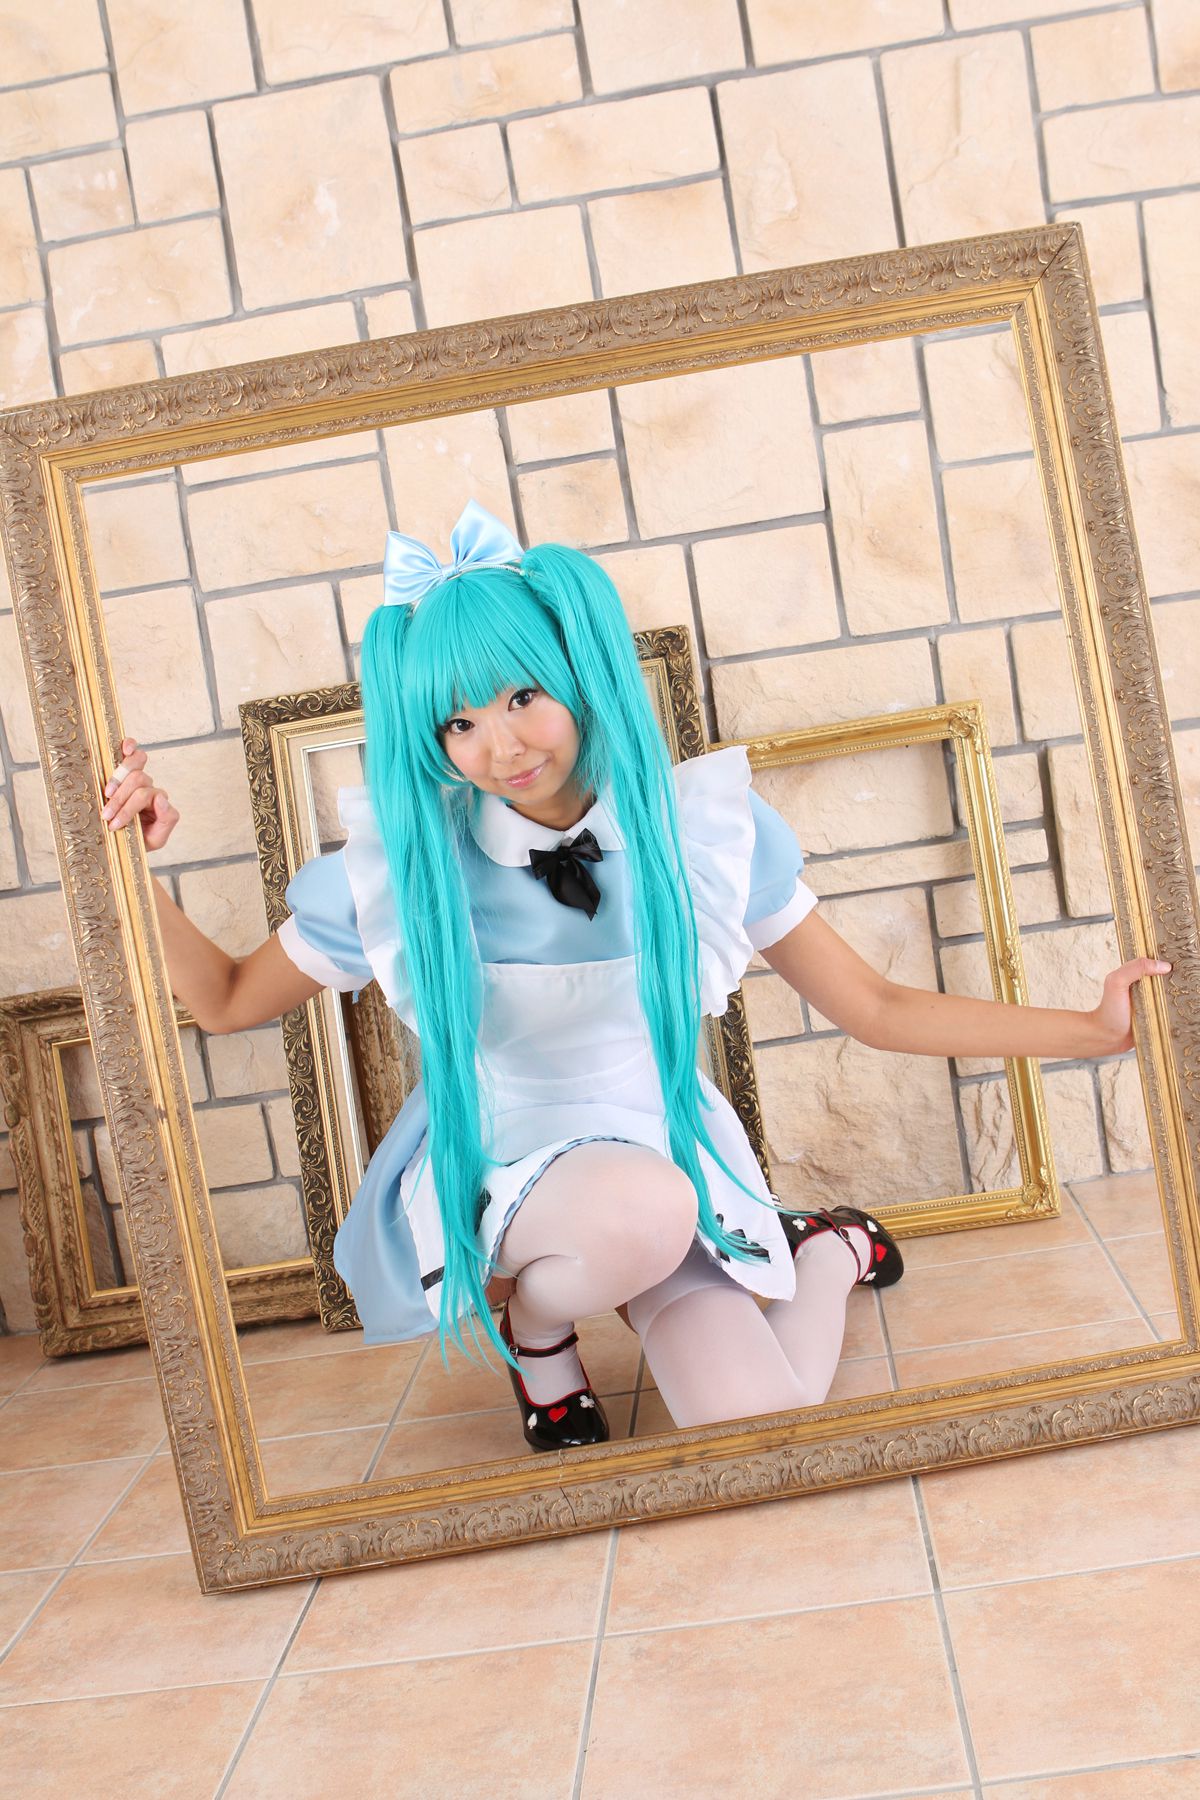 taotuhome[Cosplay套图] New Hatsune Miku from Vocaloid - So Sexy第80张